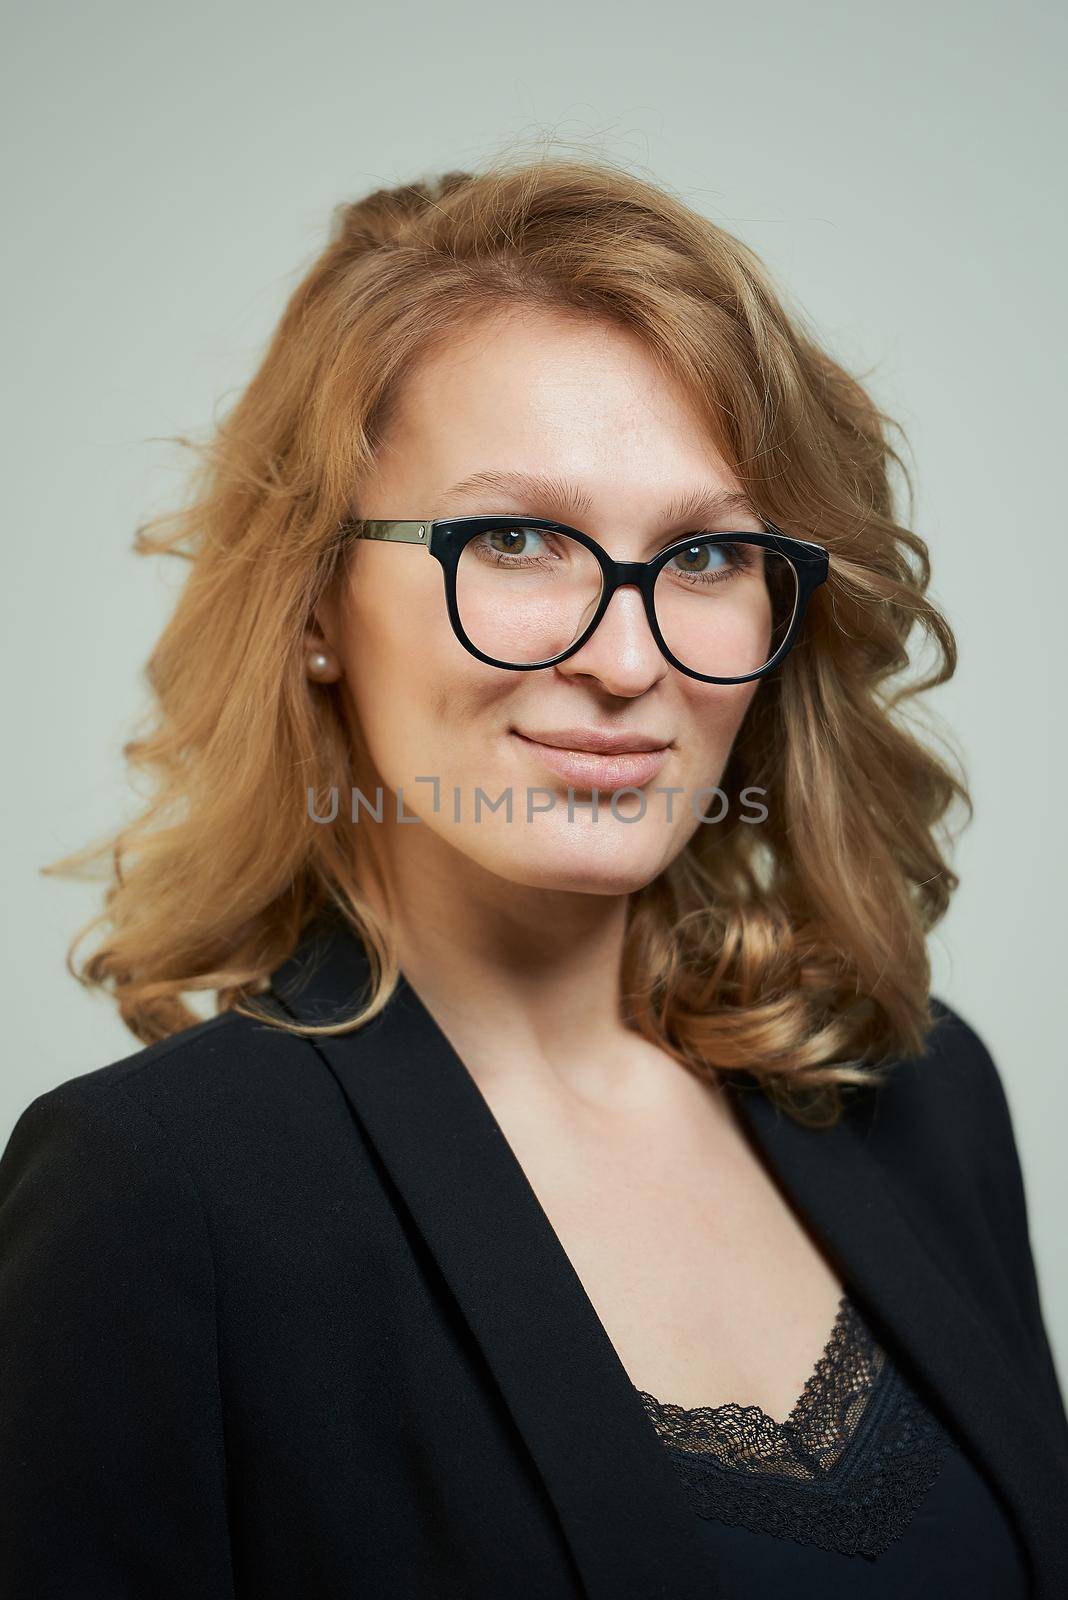 A stylish young woman in glasses dressed in a black suit with a black shirt. A close-up portrait of a happy blond lady who wears a business outfit. A concept of an office style wardrobe.